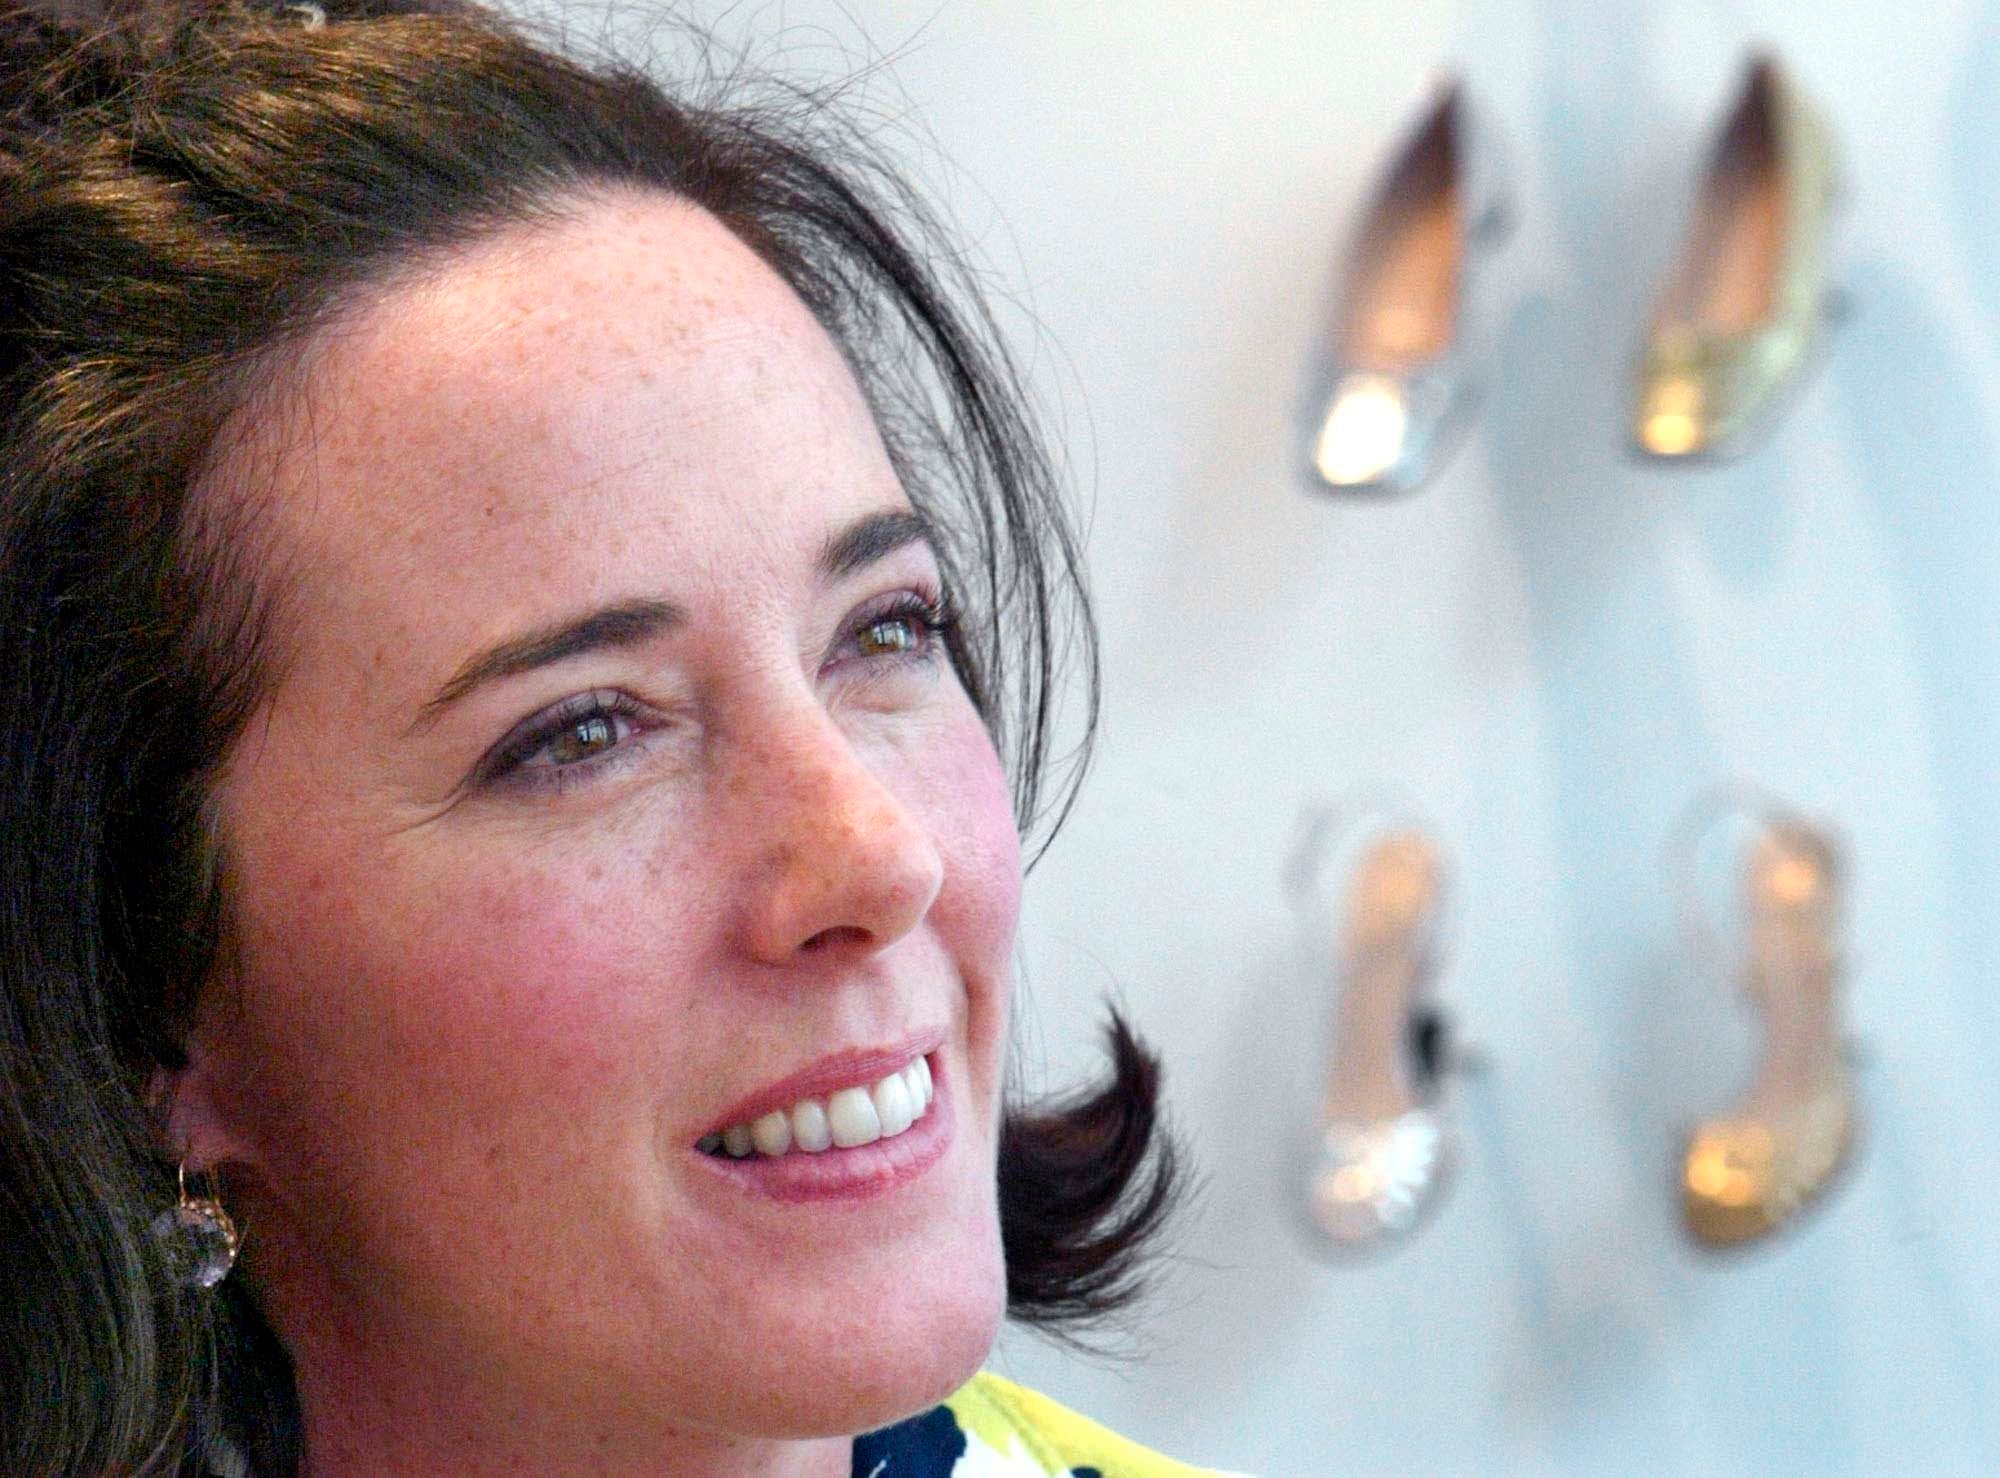 Officials: Designer Kate Spade found dead in apartment - WHYY